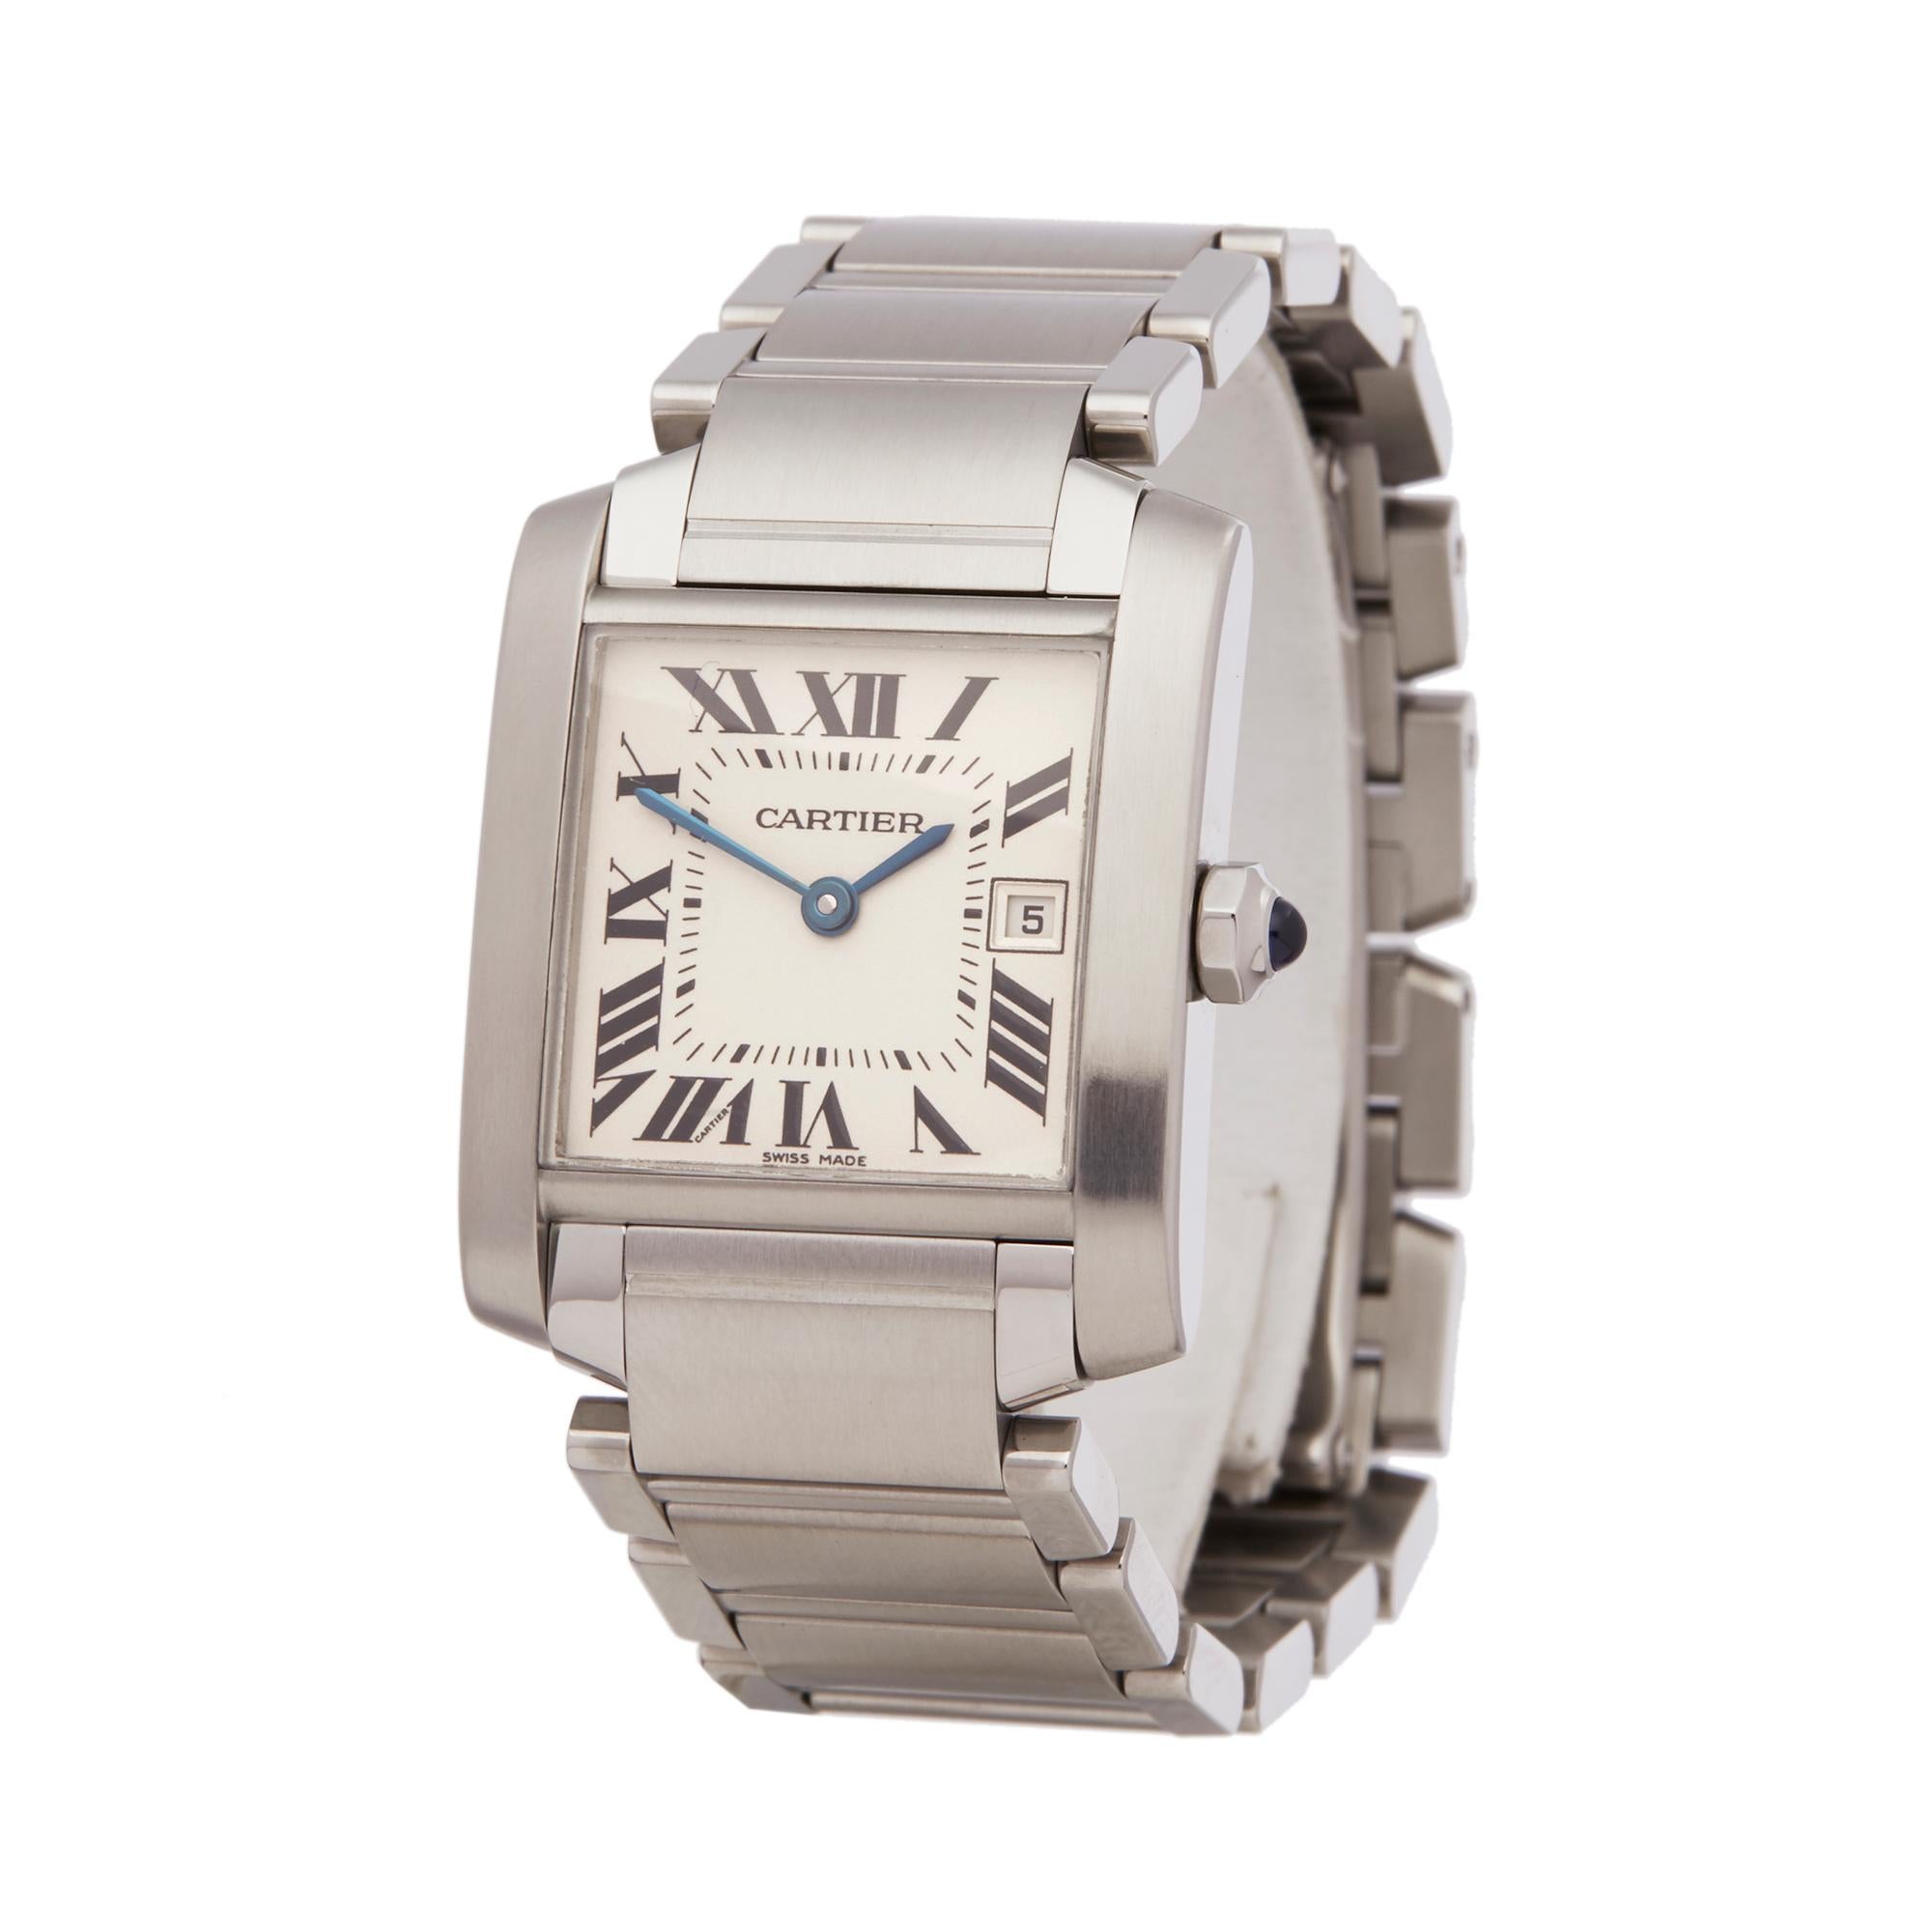 Reference: W5719
Manufacturer: Cartier
Model: Tank Francaise
Model Reference: W51011Q3
Age: Circa 2000's
Gender: Unisex
Box and Papers: Presentation Box
Dial: White Roman
Glass: Sapphire Crystal
Movement: Quartz
Water Resistance: To Manufacturers